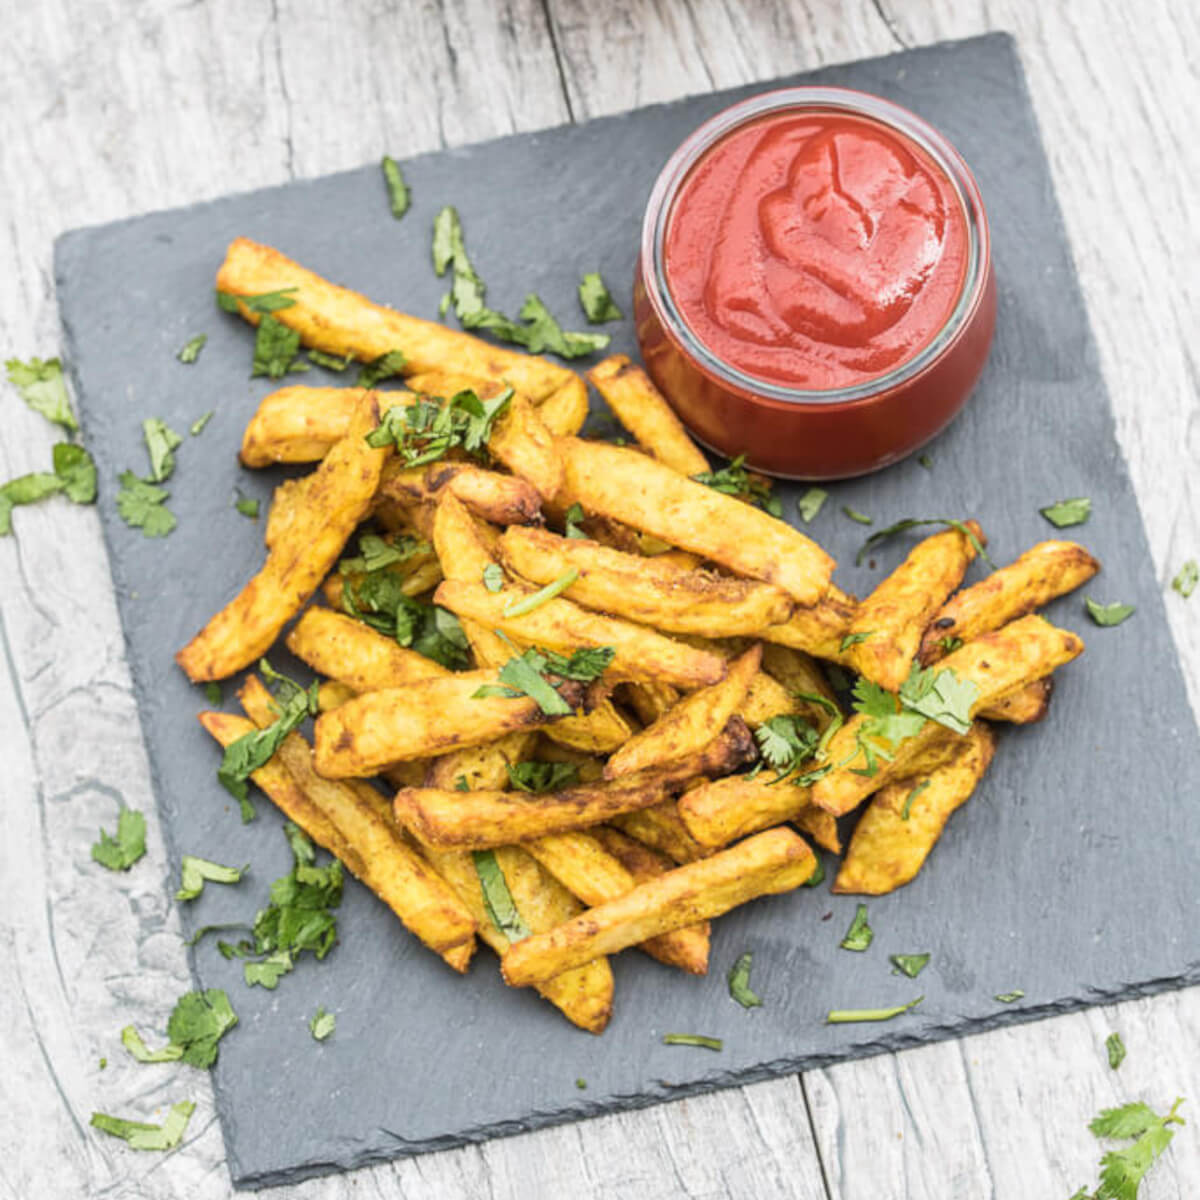 Crispy Baked Curry Fries Recipe, healthy, homemade french fries seasoned with curry - VeganFamilyRecipes.com #healthy #baked